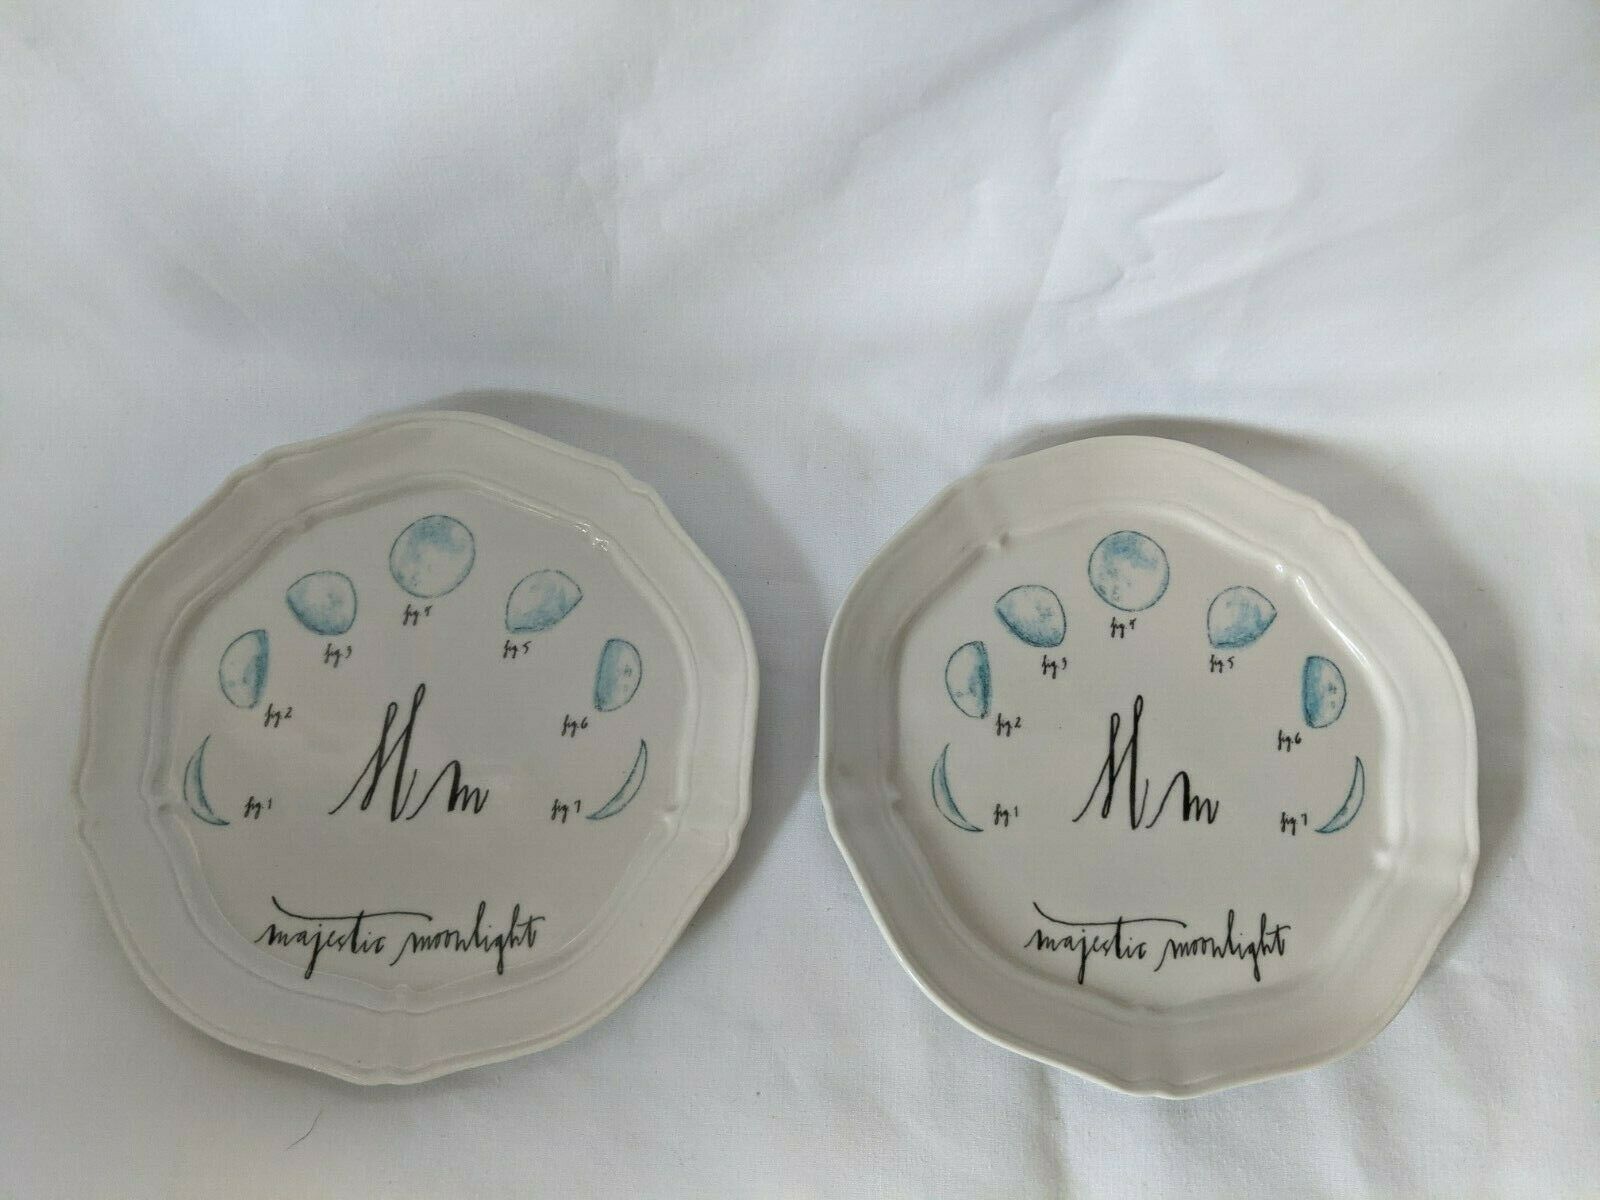 Pair Of Majestic Moonlight Dishes - Linea Carta - Anthropologie